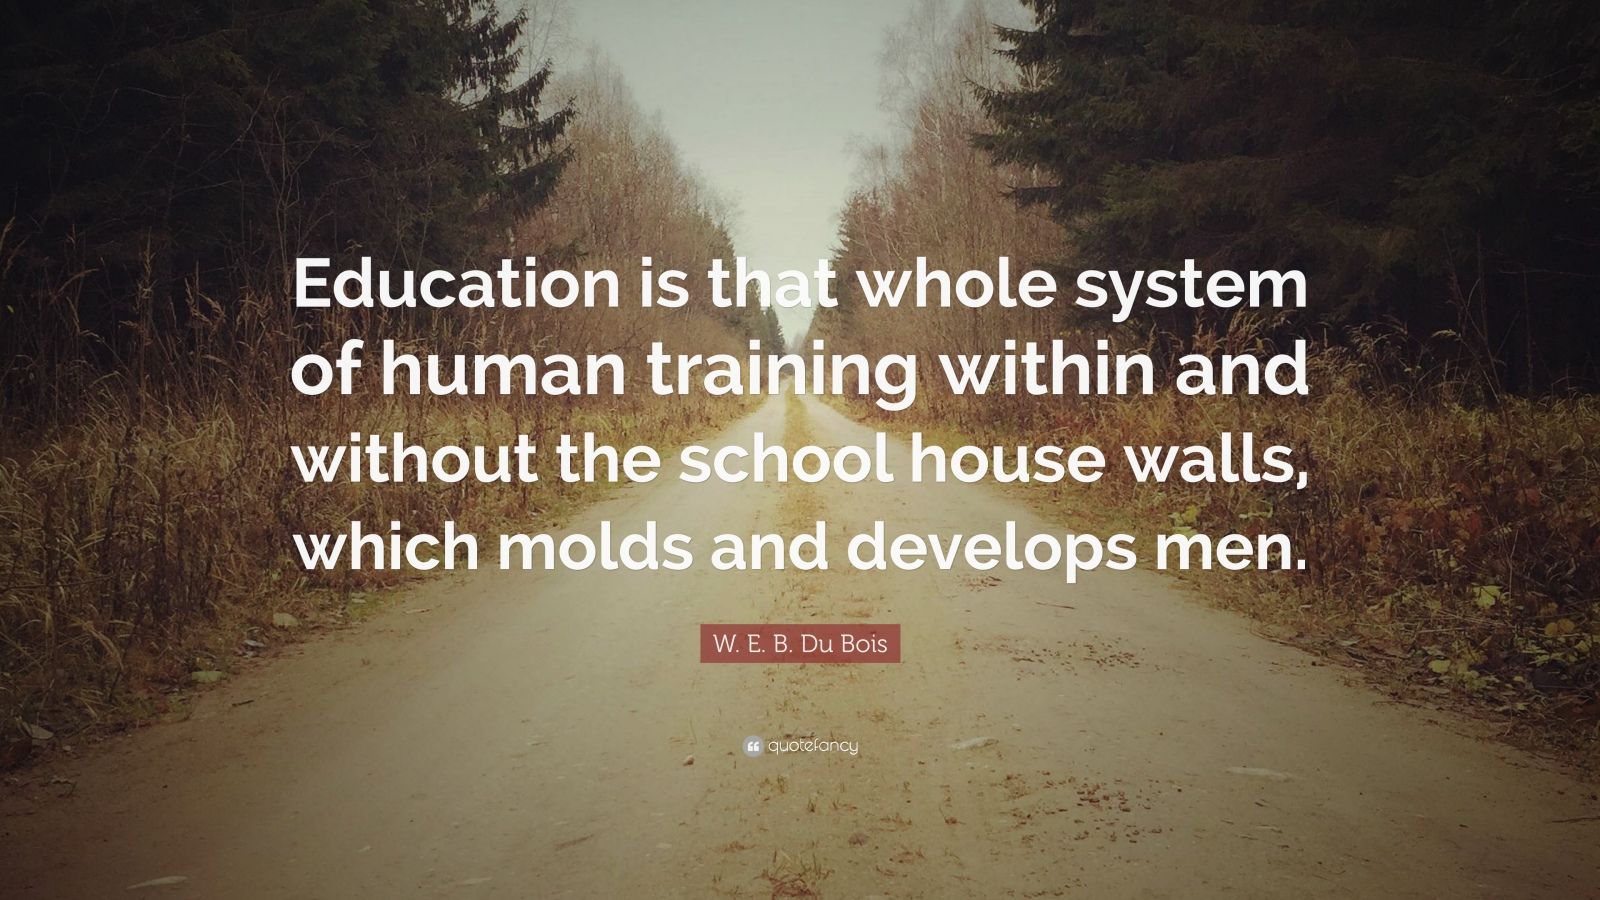 W. E. B. Du Bois Quote: “Education is that whole system of human ...